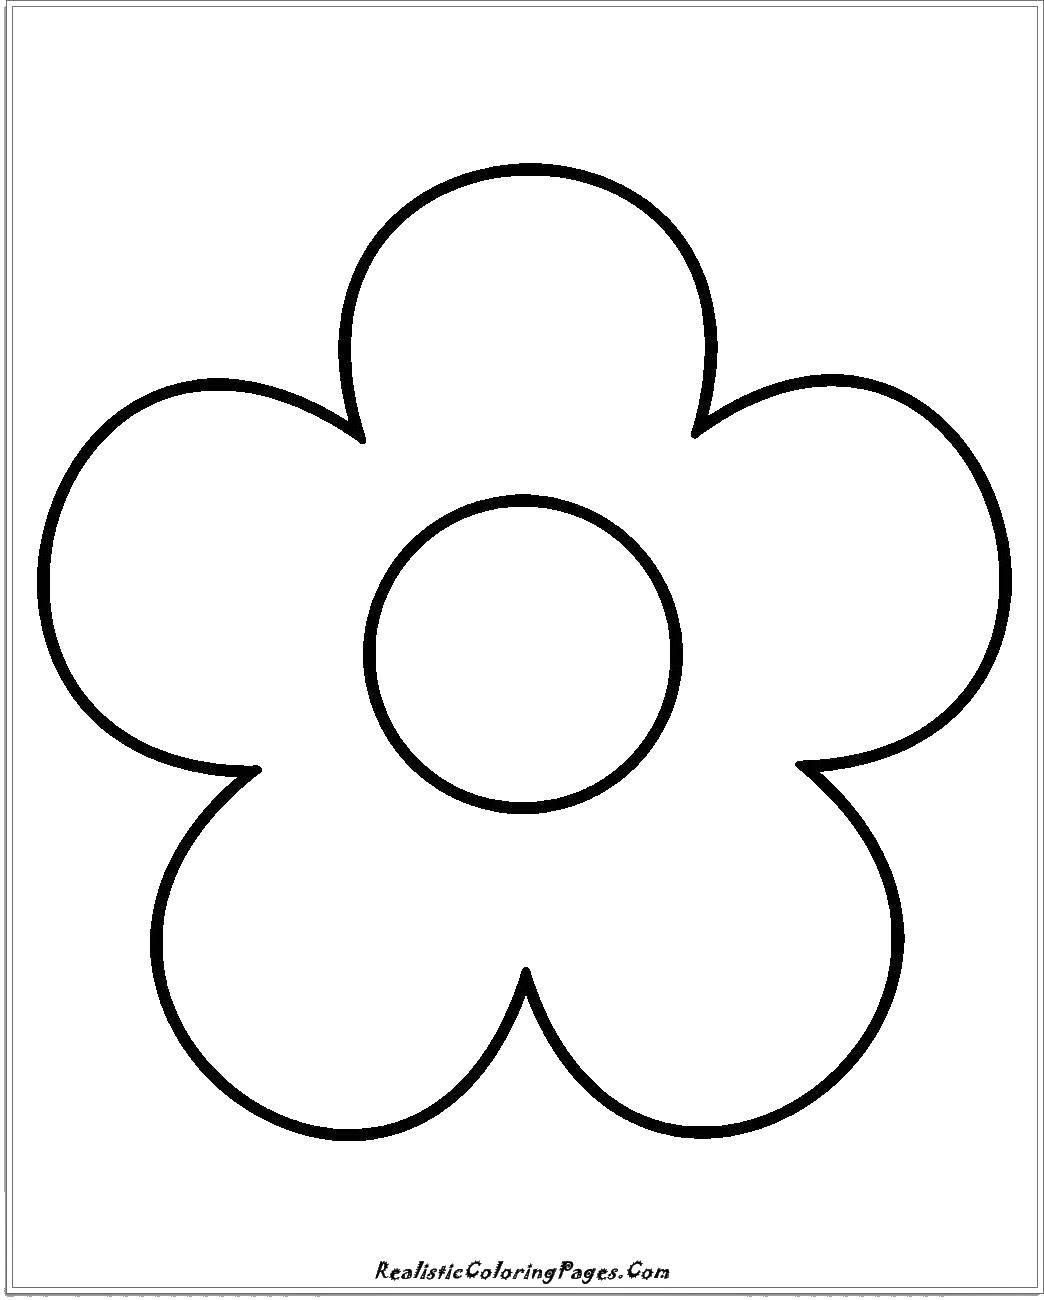 Coloring The outline of the flower. Category flowers. Tags:  contour, flowers, petals.